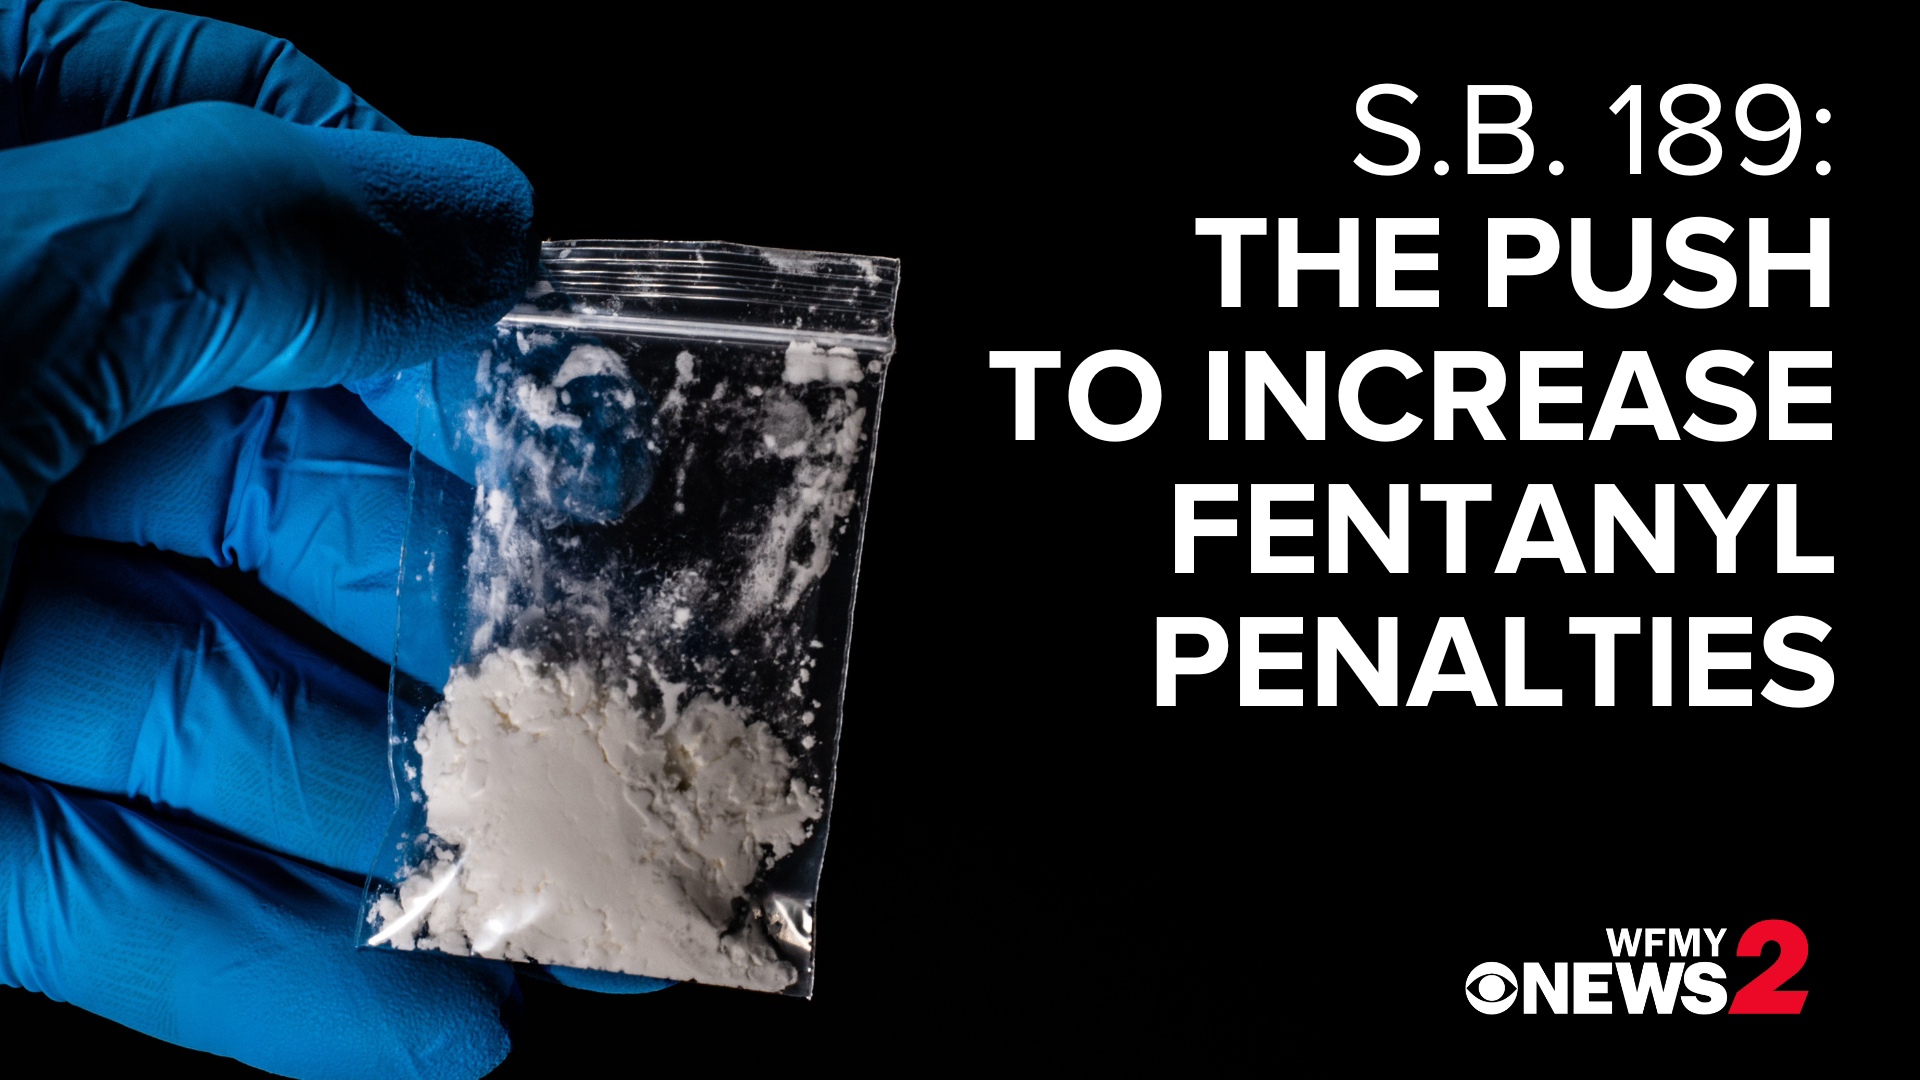 The CDC says over 150 people die every day from overdoses related to synthetic opioids like fentanyl.